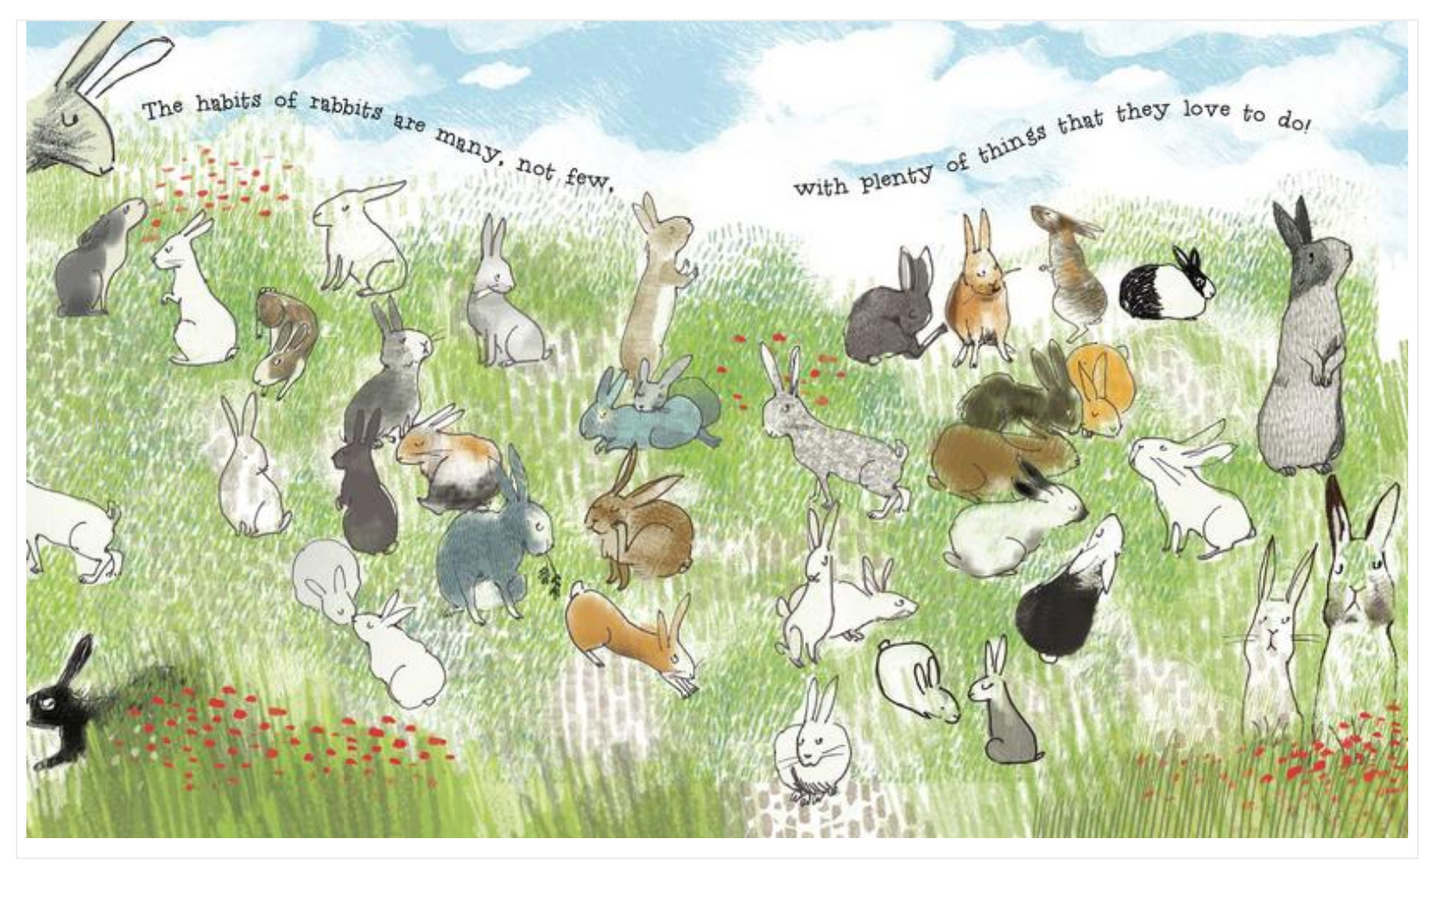 Board Book, Baby - THE WONDERFUL HABITS OF RABBITS